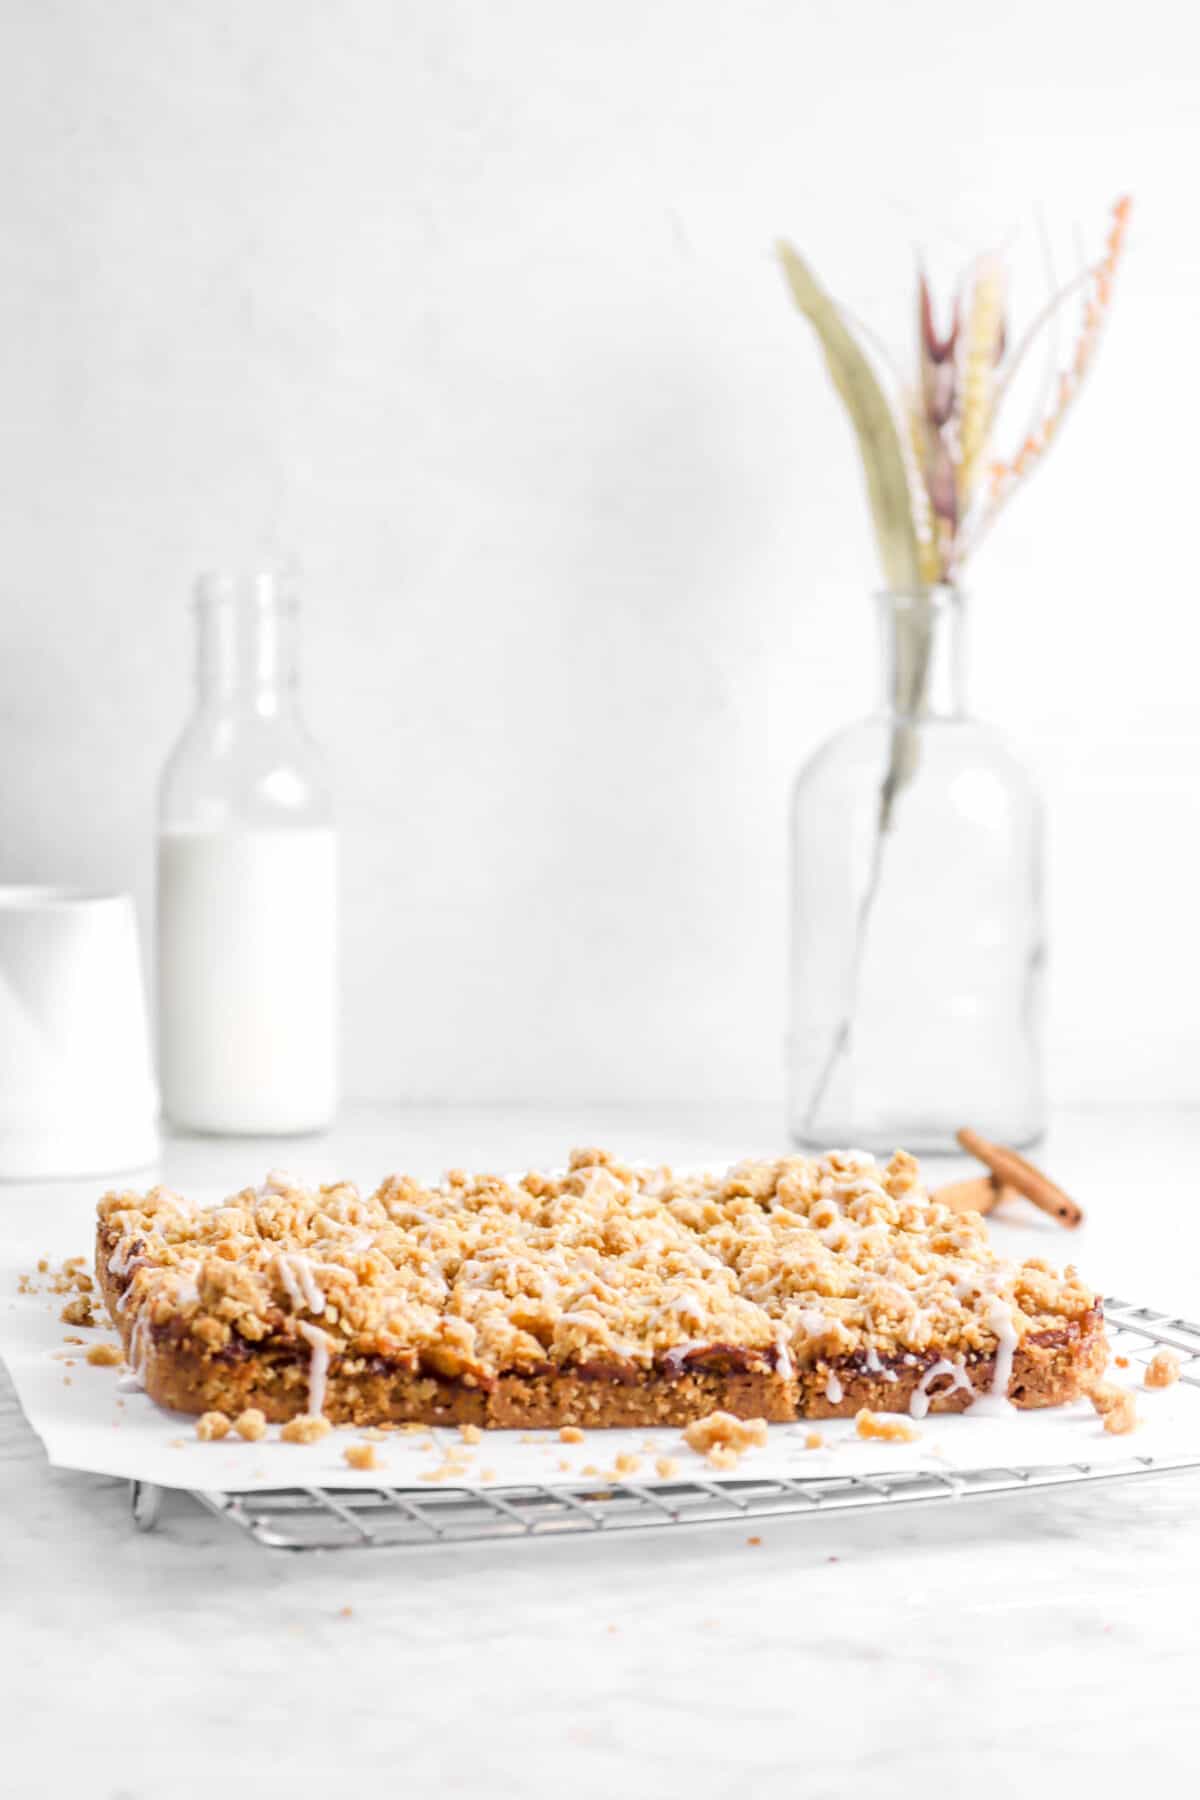 crumble bars on a cooling rack with milk, wheat, and cinnamon sticks behind